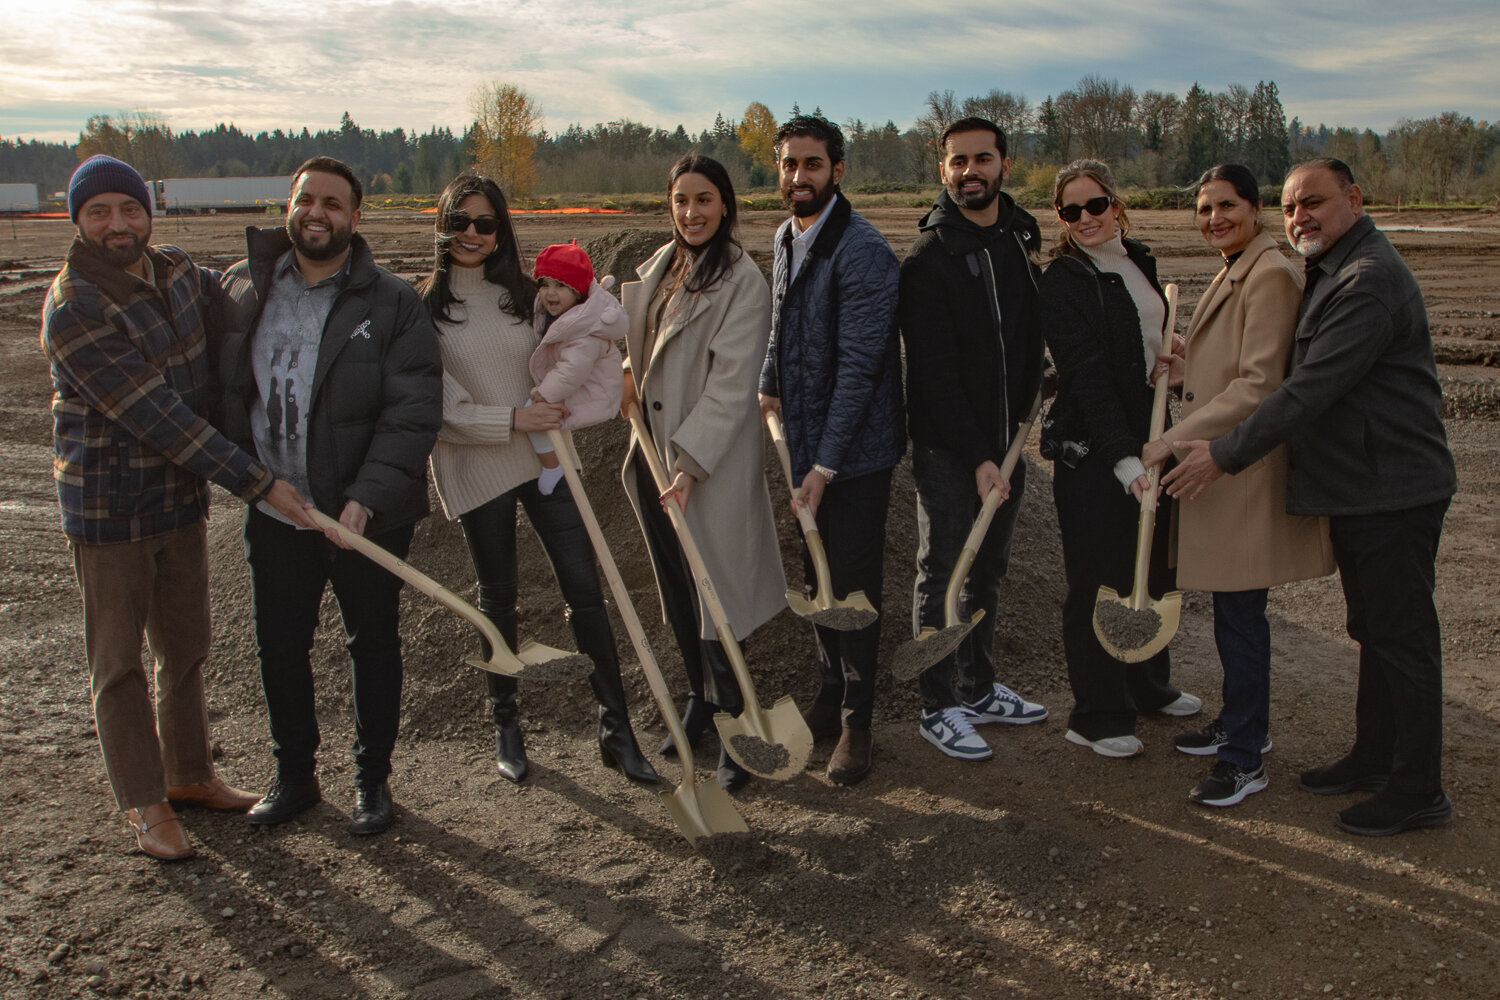 From the left, Inderjit Singh, TA Napavine co-owner Damanjit Singh, Manveer Sodhi, Syra Sodhi, Kamal Sidhu, TA Napavine co-owner Gurinderjit Sidhu, TA Napavine co-owner Manpreet Singh, Karina Multani, Satwinder Kaur and Sukhdeep Multani pose for a photo during a groundbreaking ceremony held on Tuesday, Nov. 21, for the new TA Napavine truck stop being constructed off of Exit 72 on Interstate 5.